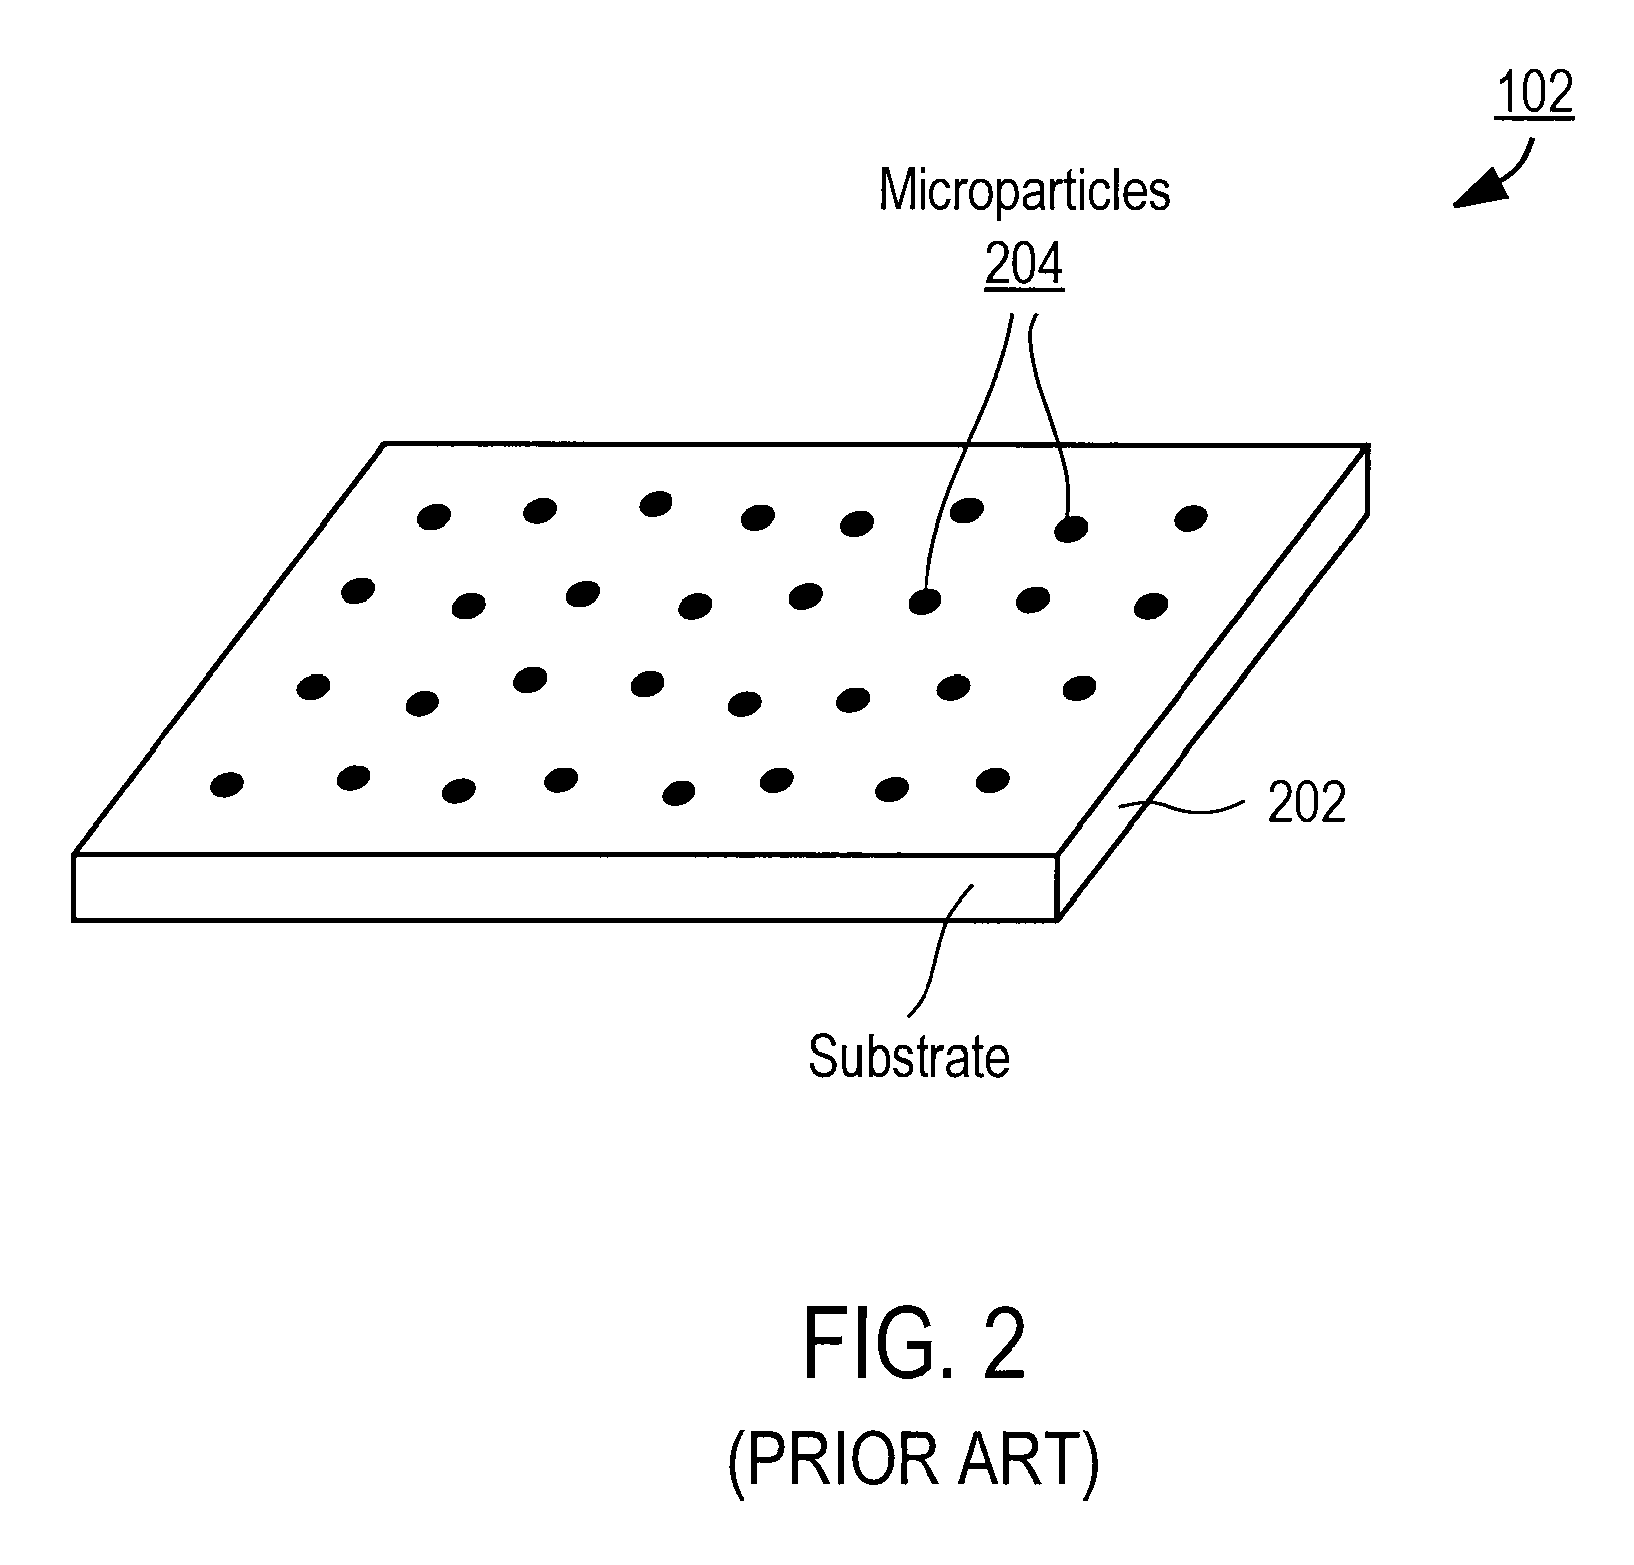 Apparatus for selective excitation of microparticles